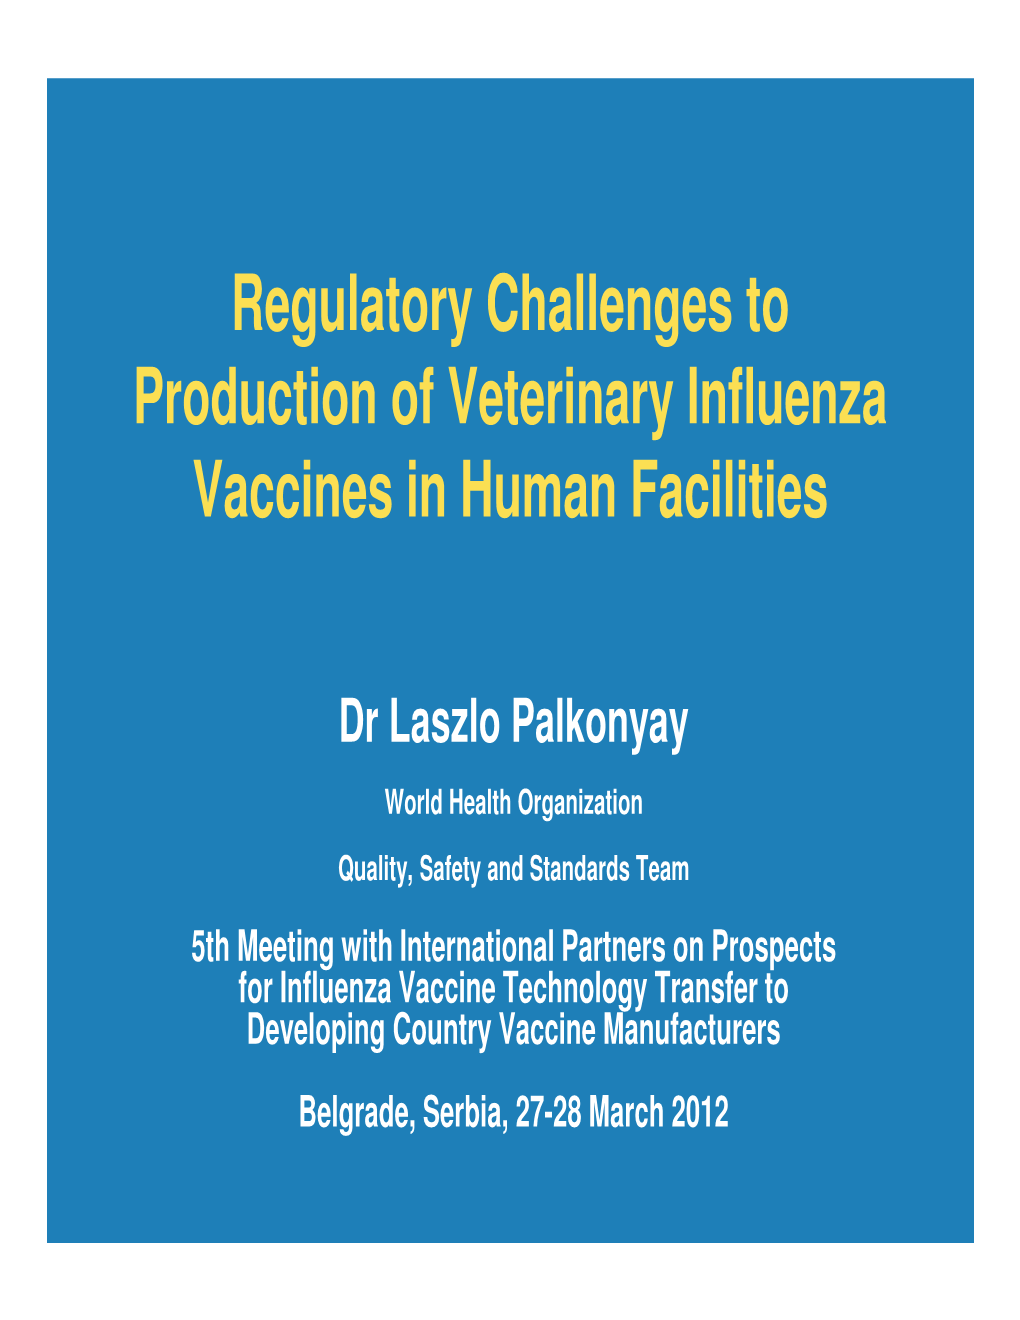 Regulatory Challenges to Production of Veterinary Influenza Vaccines in Human Facilities